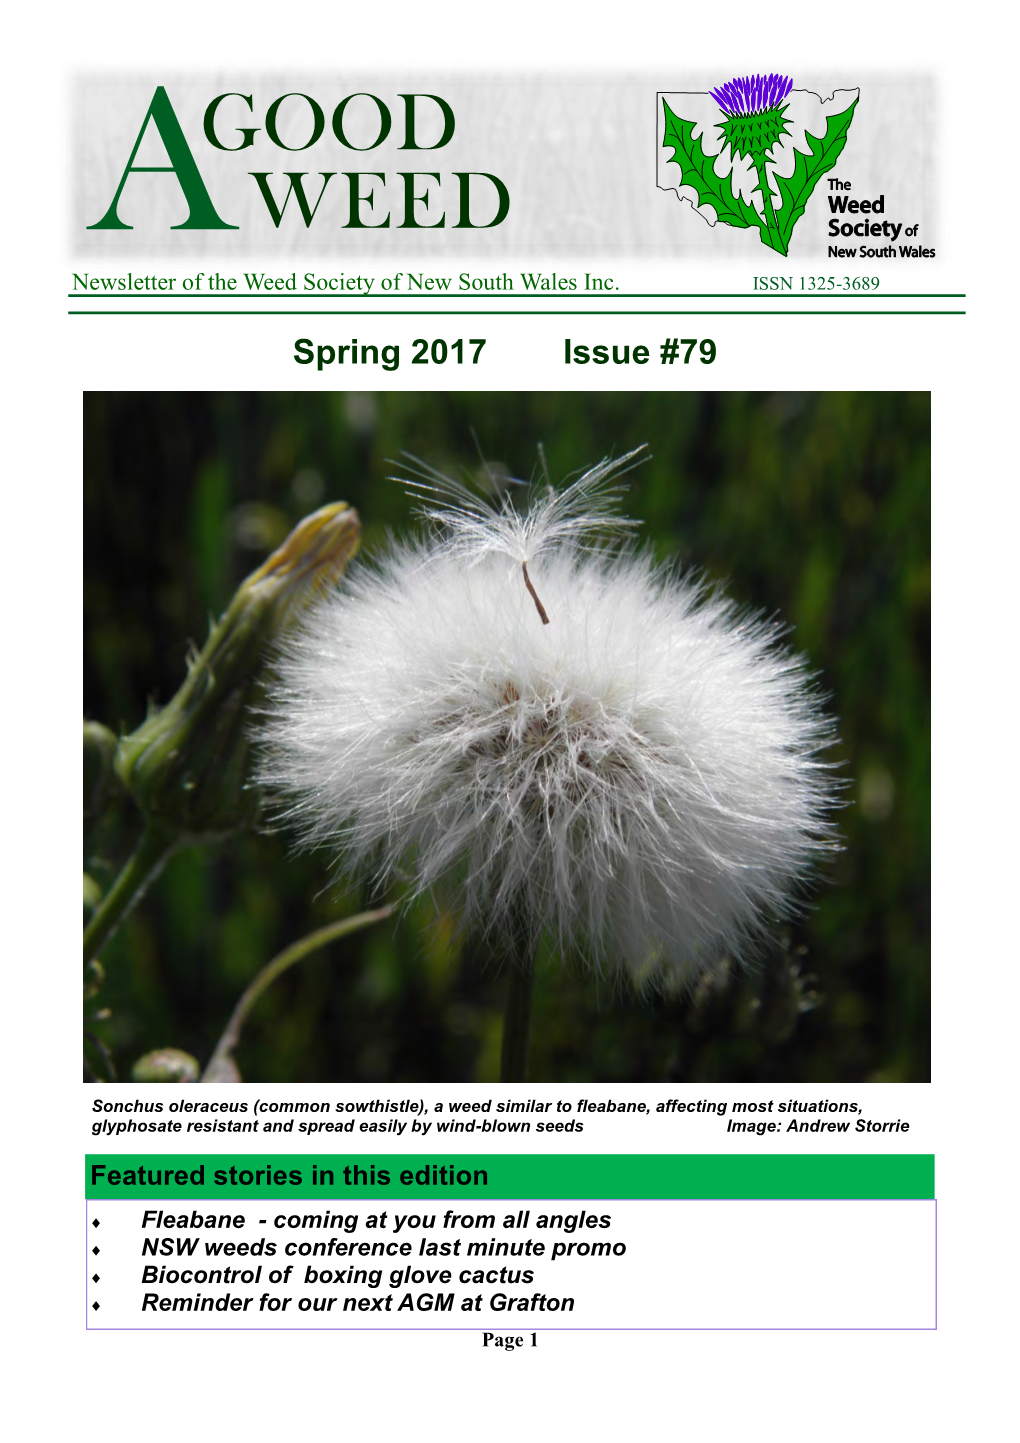 A Good Weed #79 Spring 2017 a WEED Newsletter of the Weed Society of New South Wales Inc